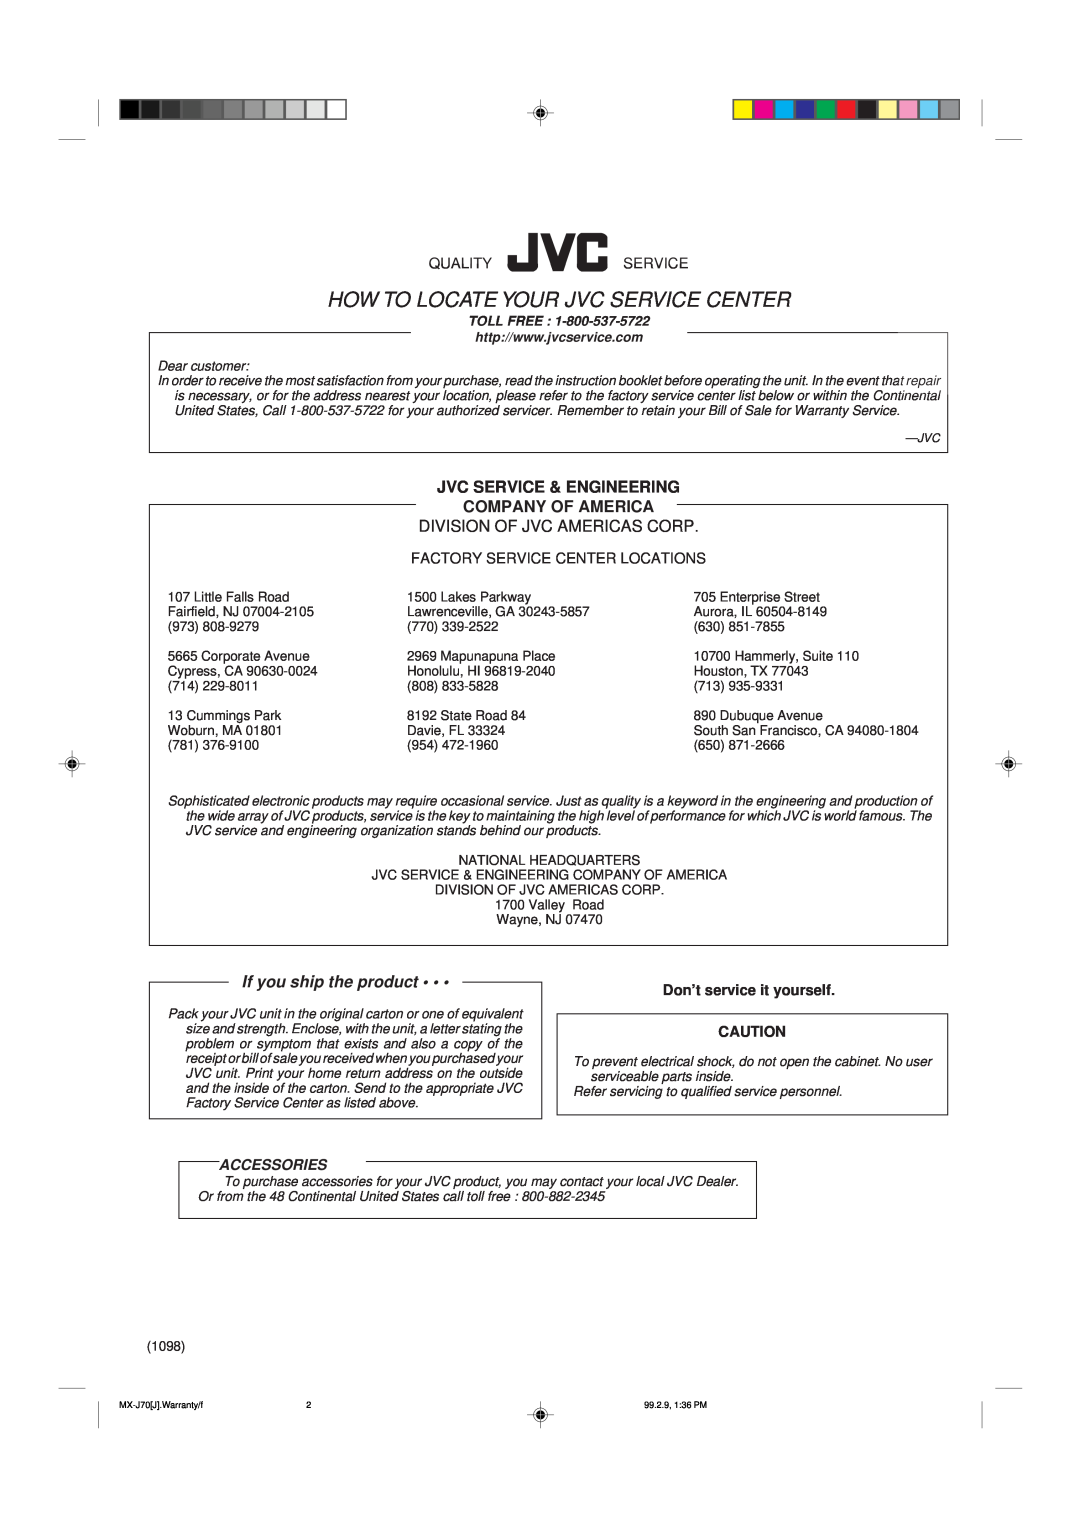 JVC Model MX-J70J Jvc Service & Engineering Company Of America, Division Of Jvc Americas Corp, Qualityservice, Accessories 